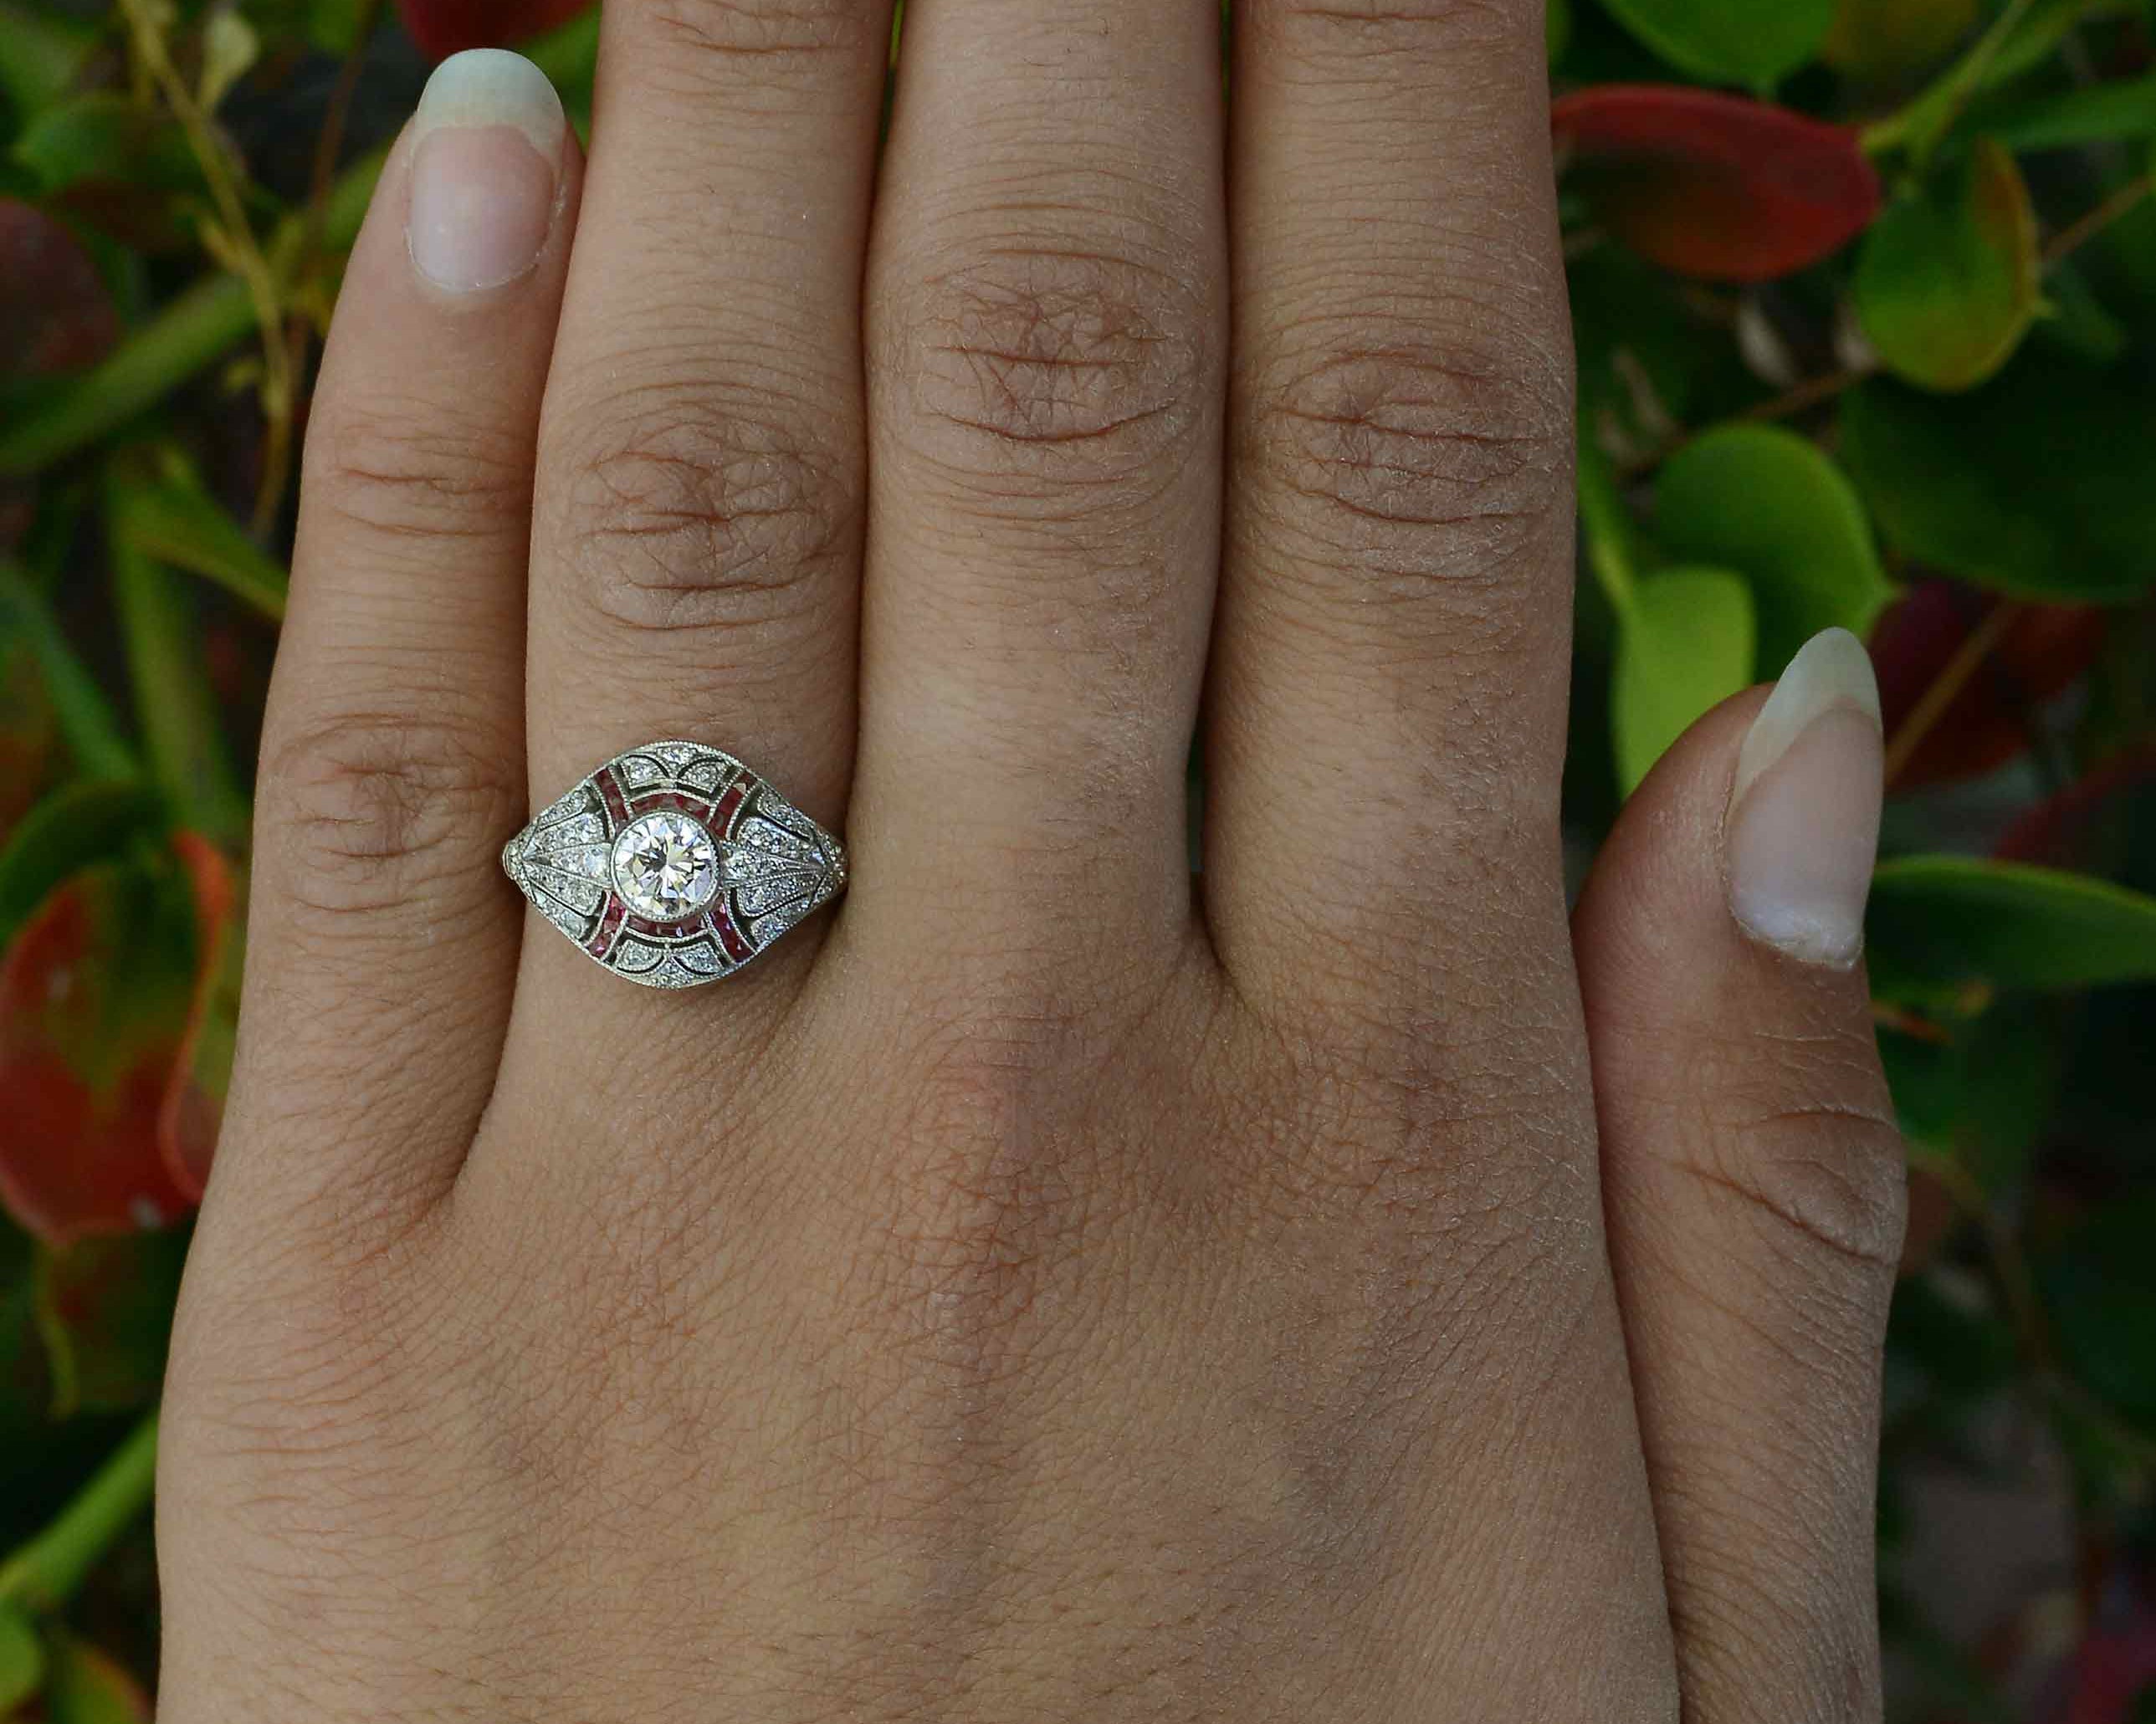 Hand fabricated diamond engagement ring, accented by rubies.